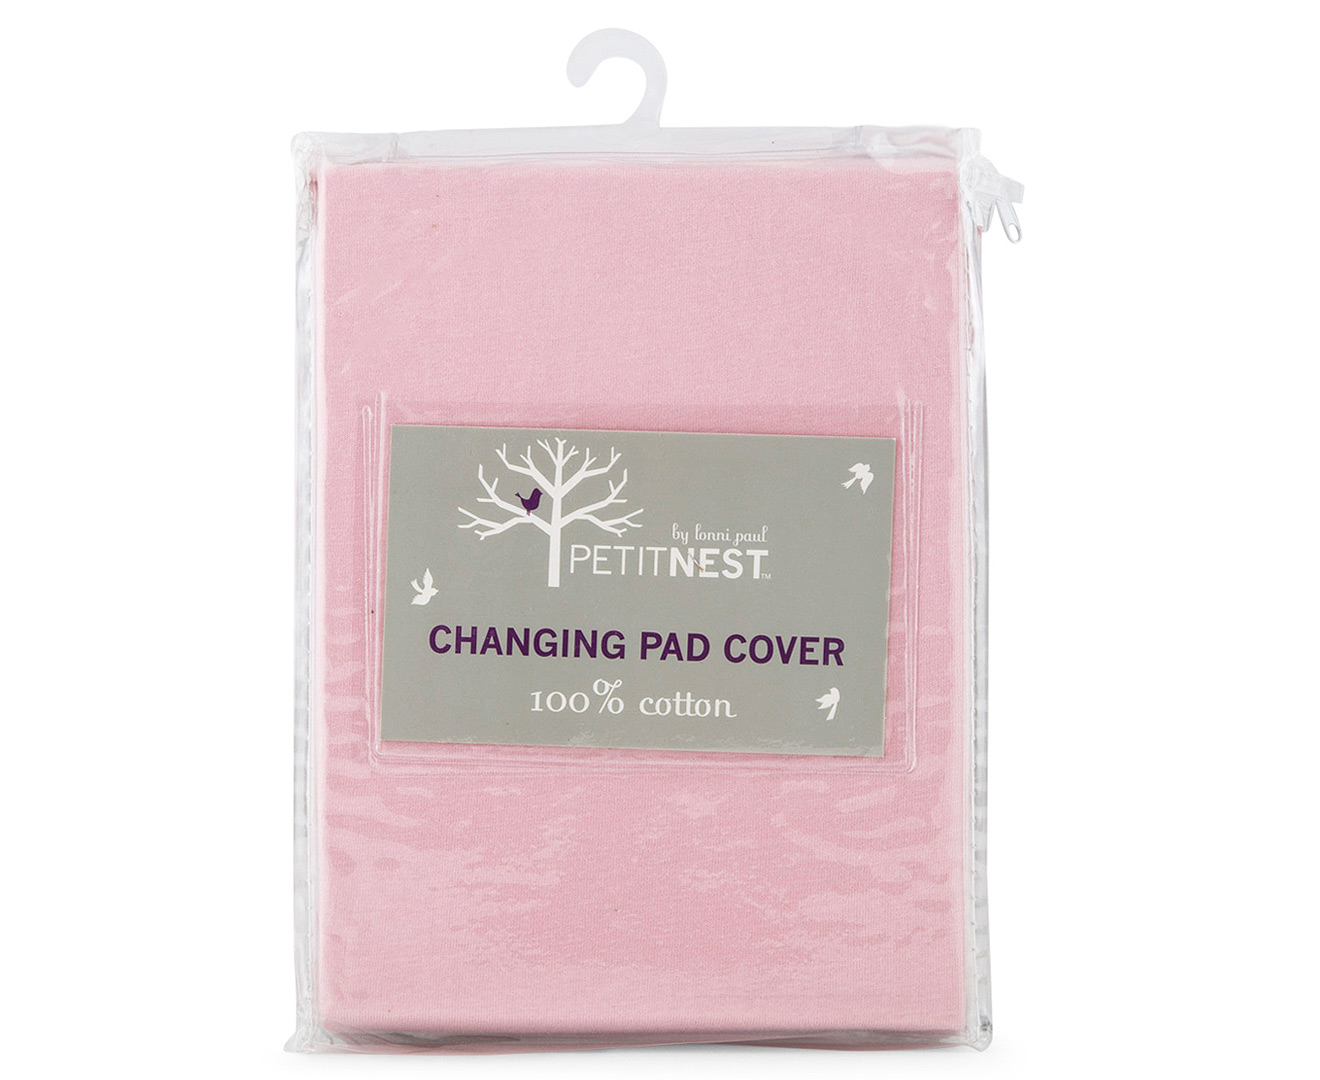 Petit Nest Changing Pad Cover - Pink